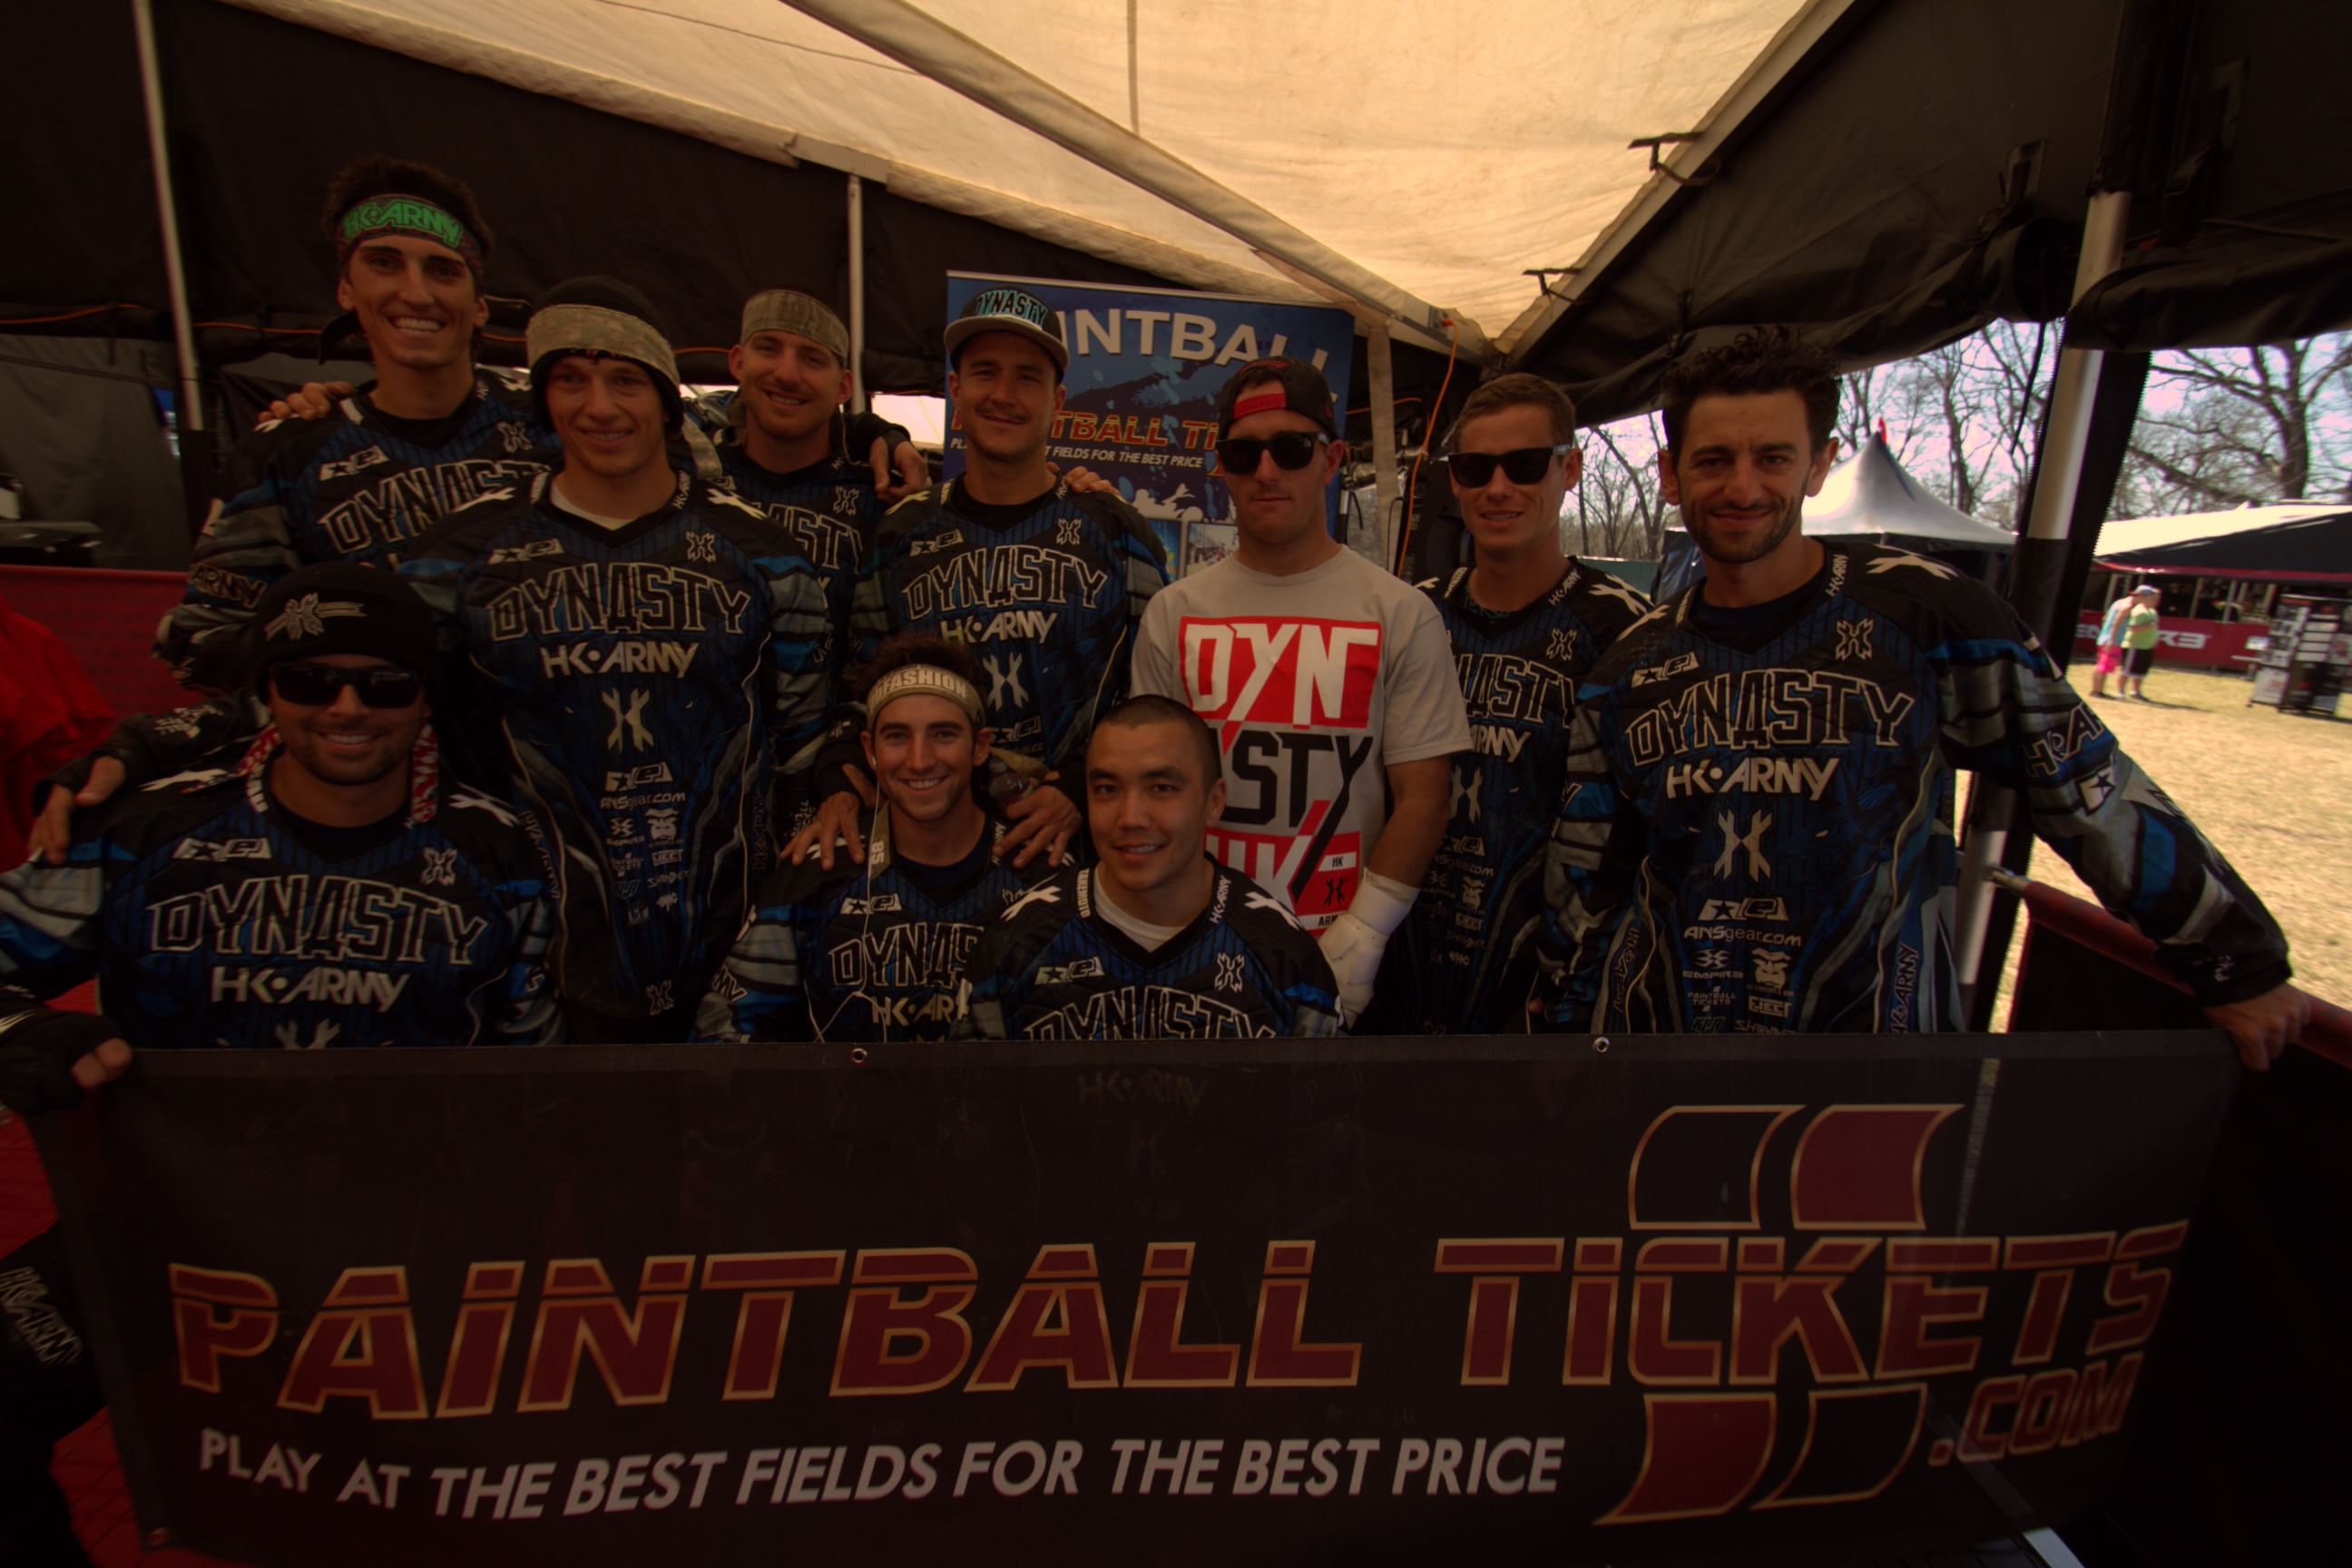 Dynasty Partners with PaintballTickets.com to Bring New Players to the Sport in 2013